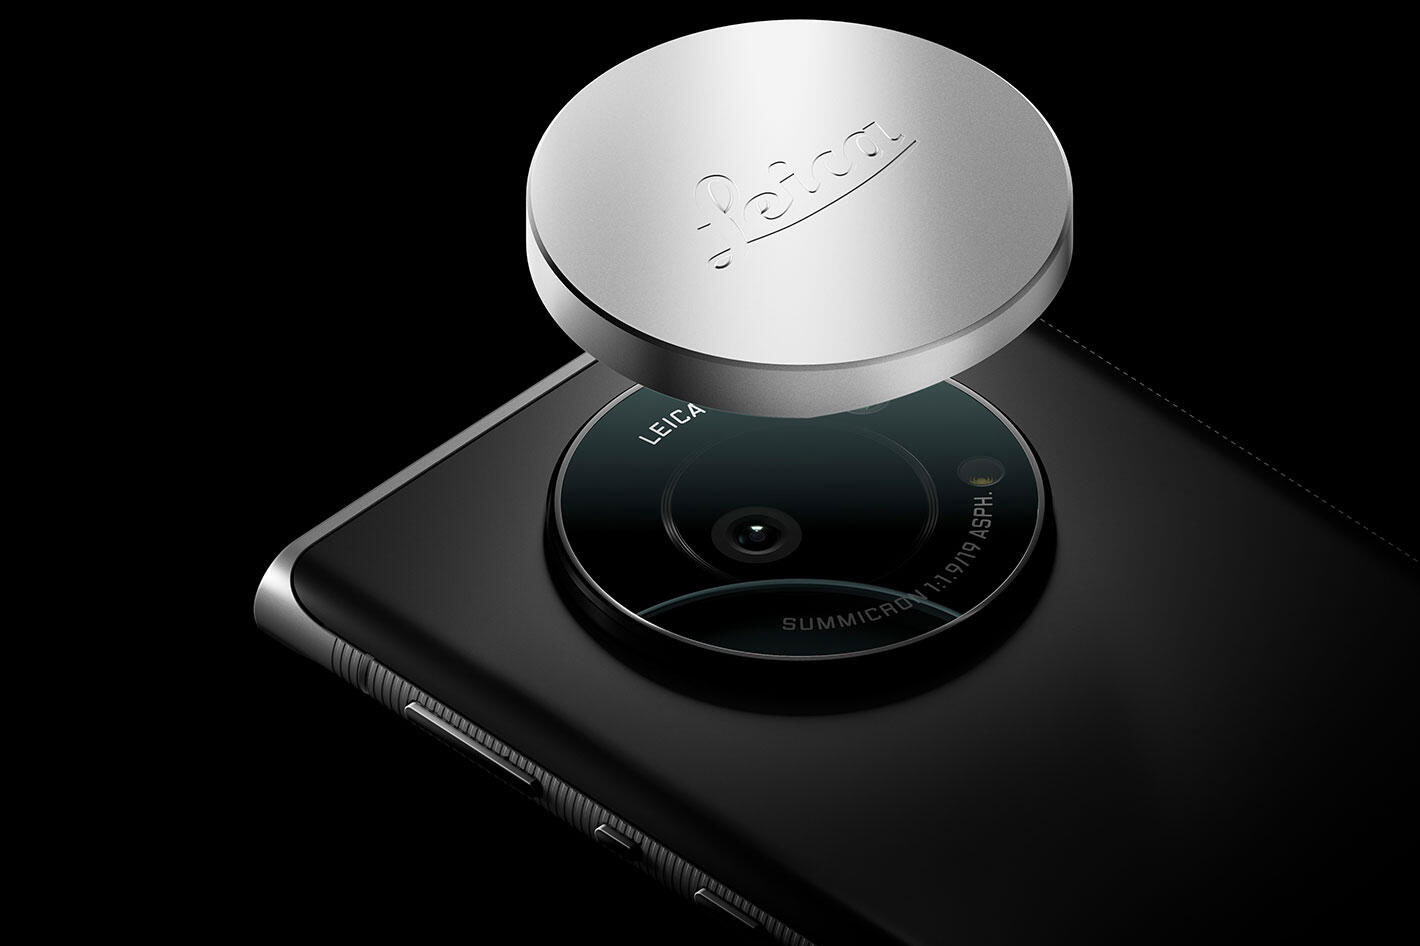 Leitz Phone 1: your next Leica may be a smartphone…